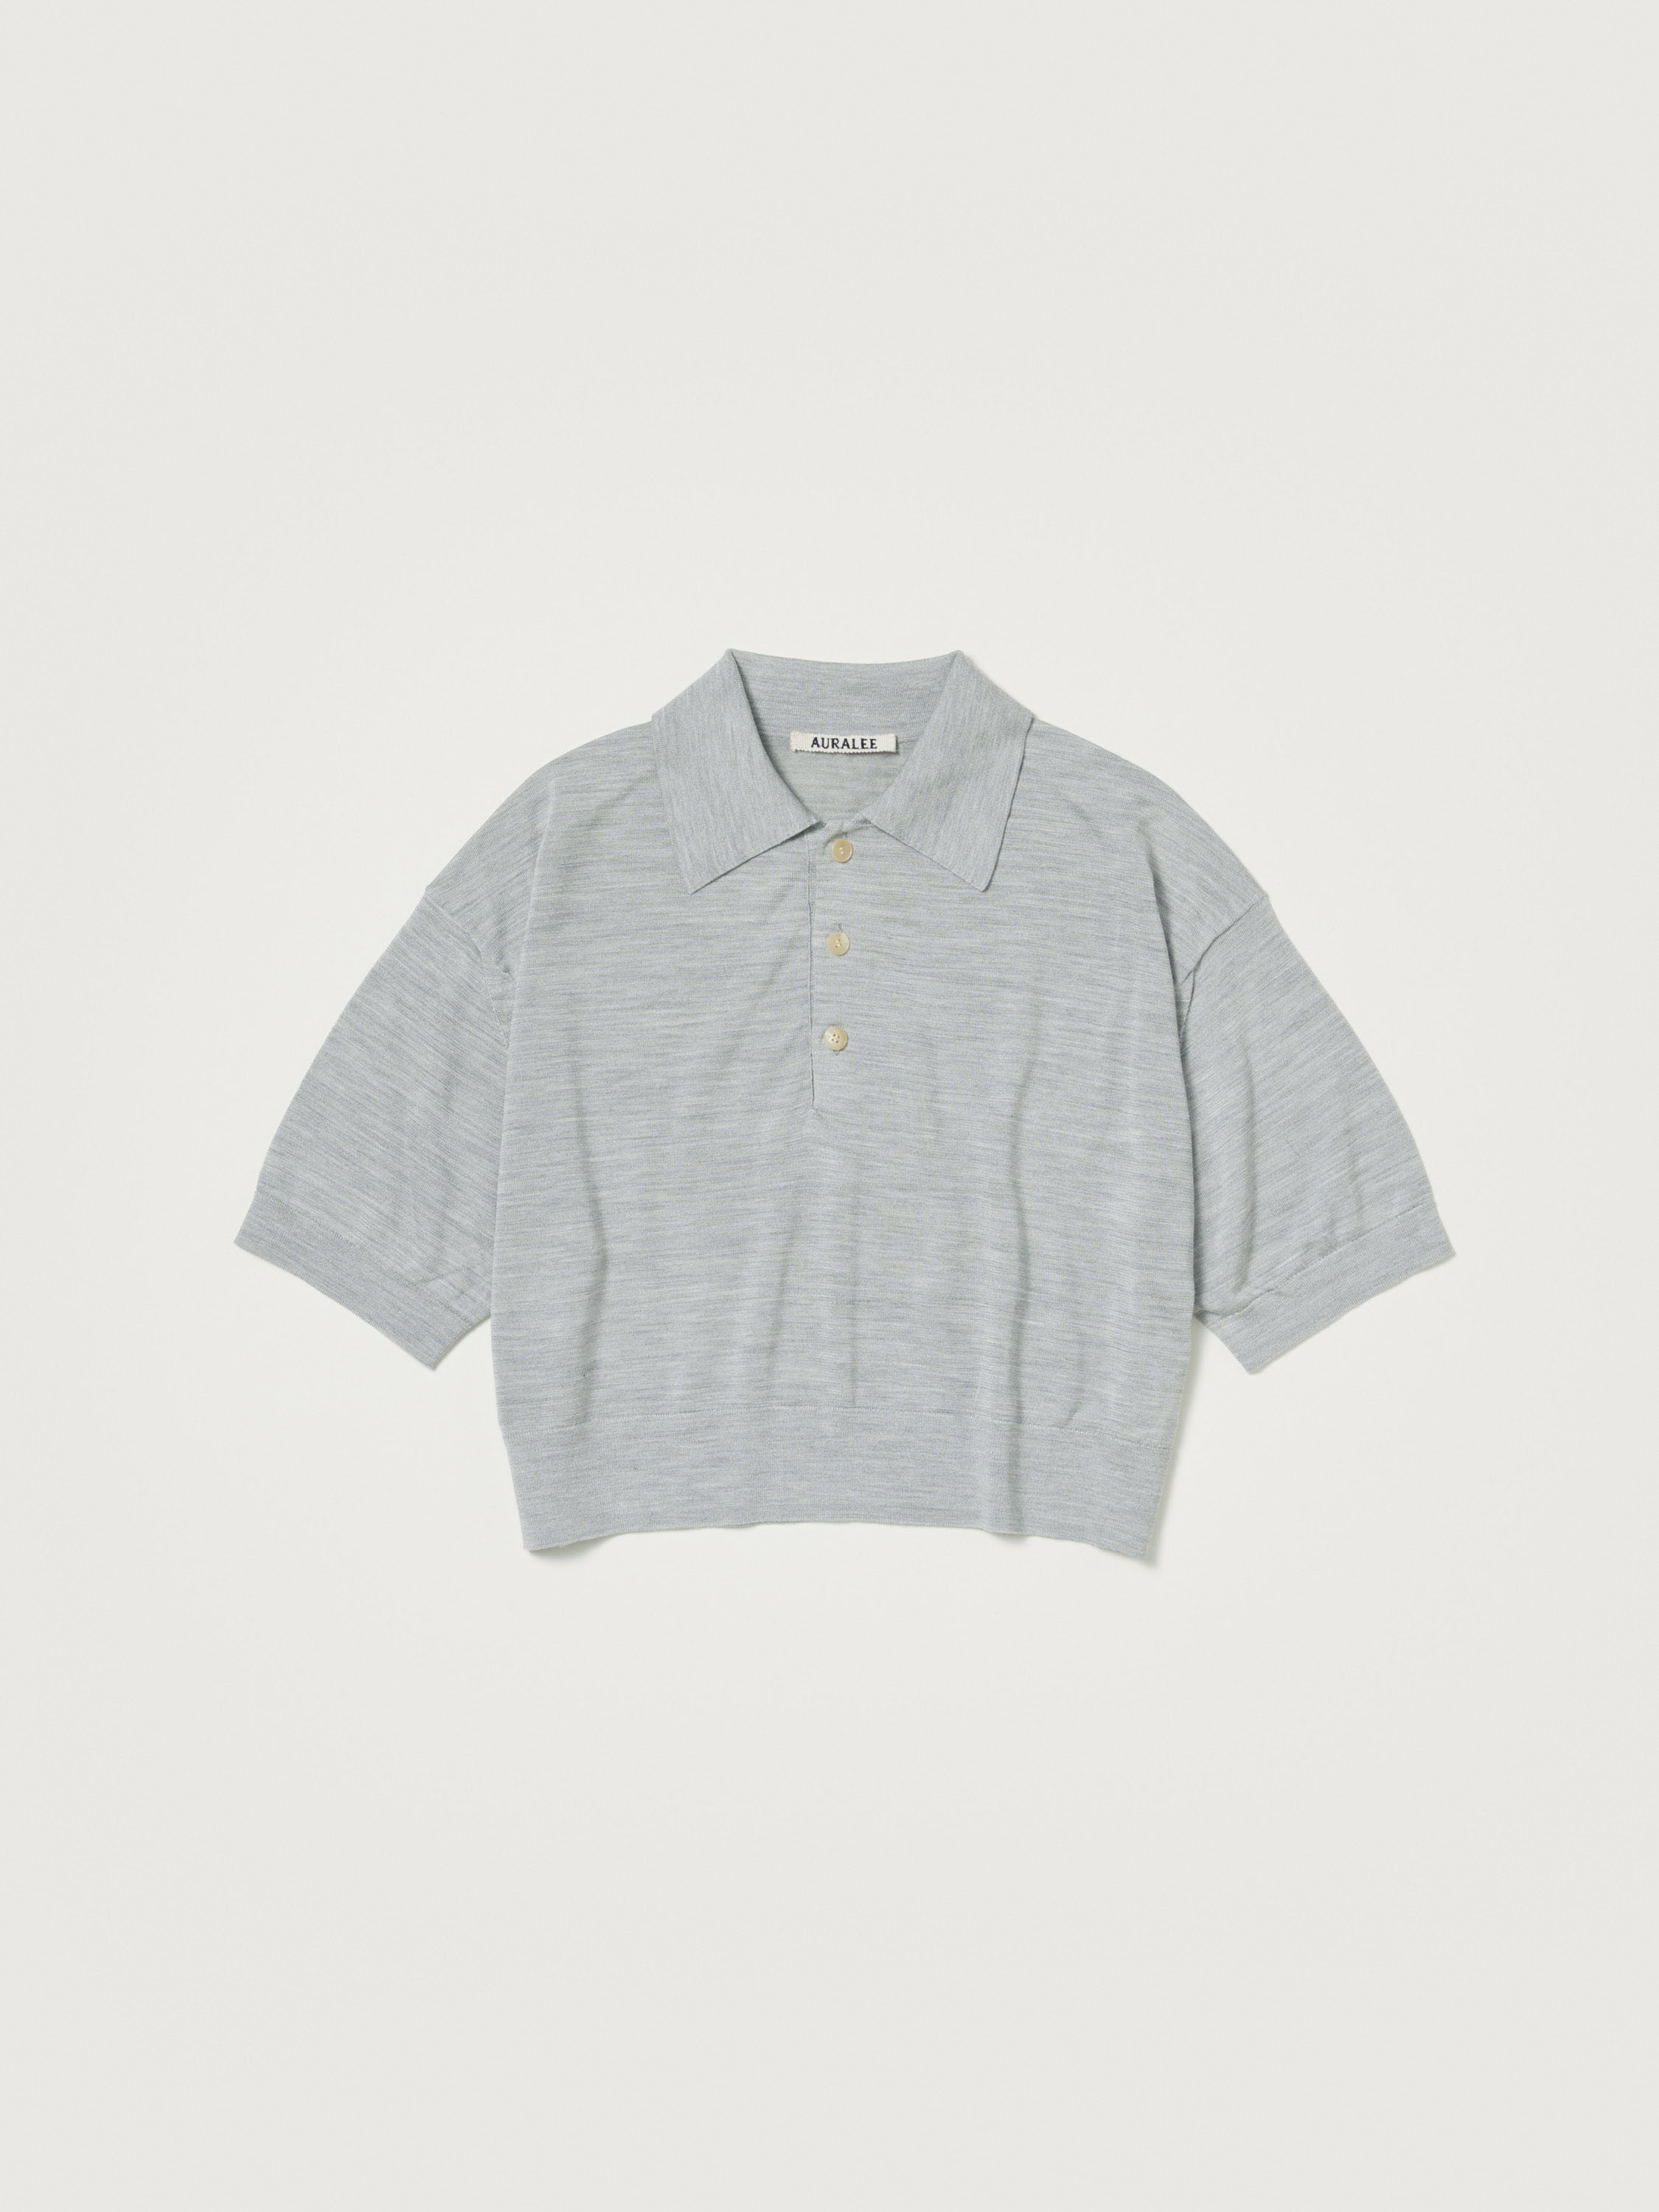 SUPER HIGH GAUGE WASHABLE SILK KNIT SHORT POLO 詳細画像 TOP GRAY 3